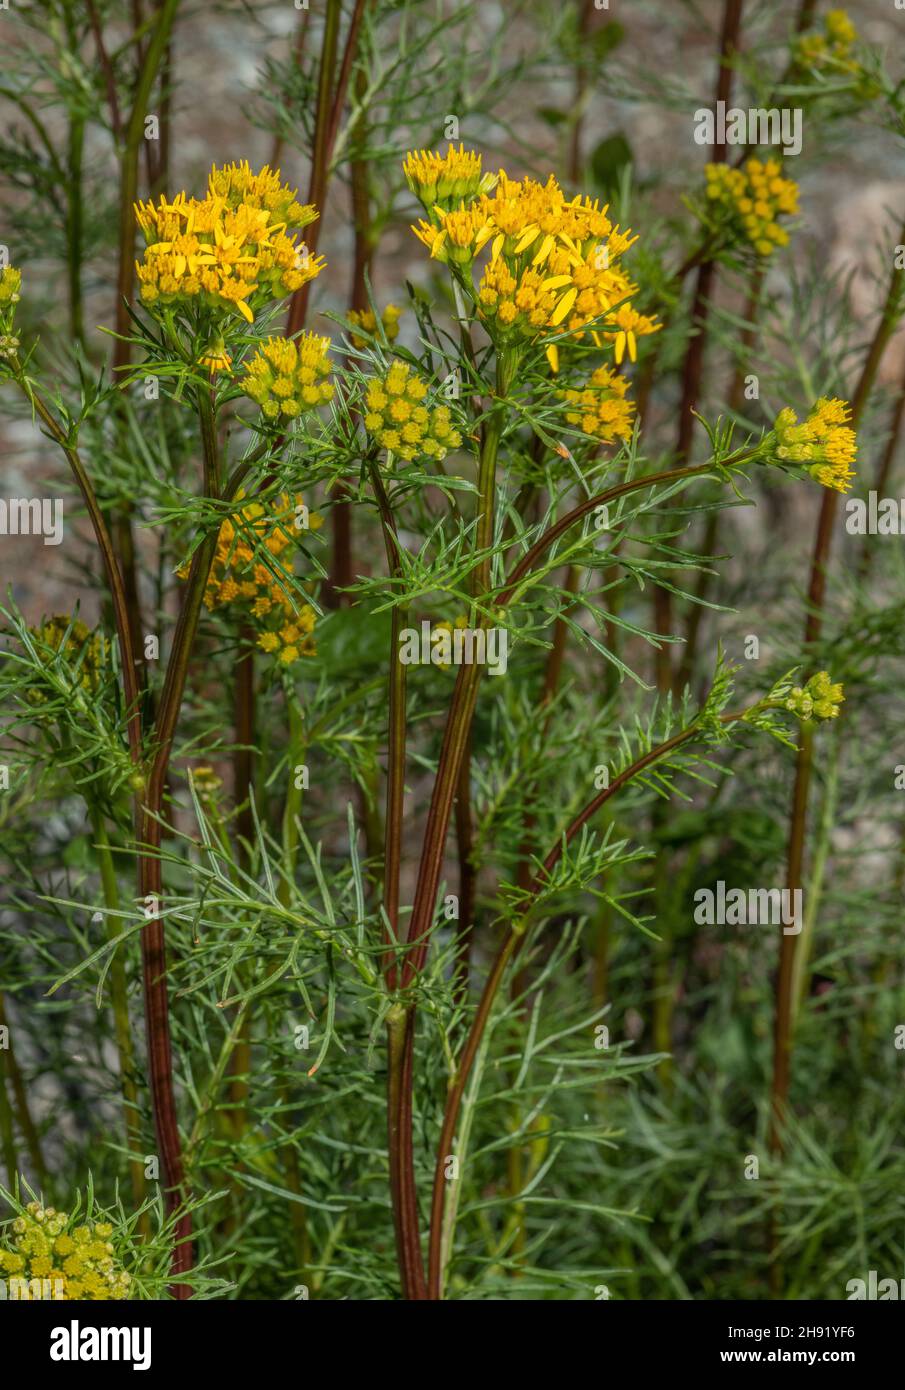 Adonis-leaved groundsel, Jacobaea adonidifolia, in flower in the Alps. Stock Photo